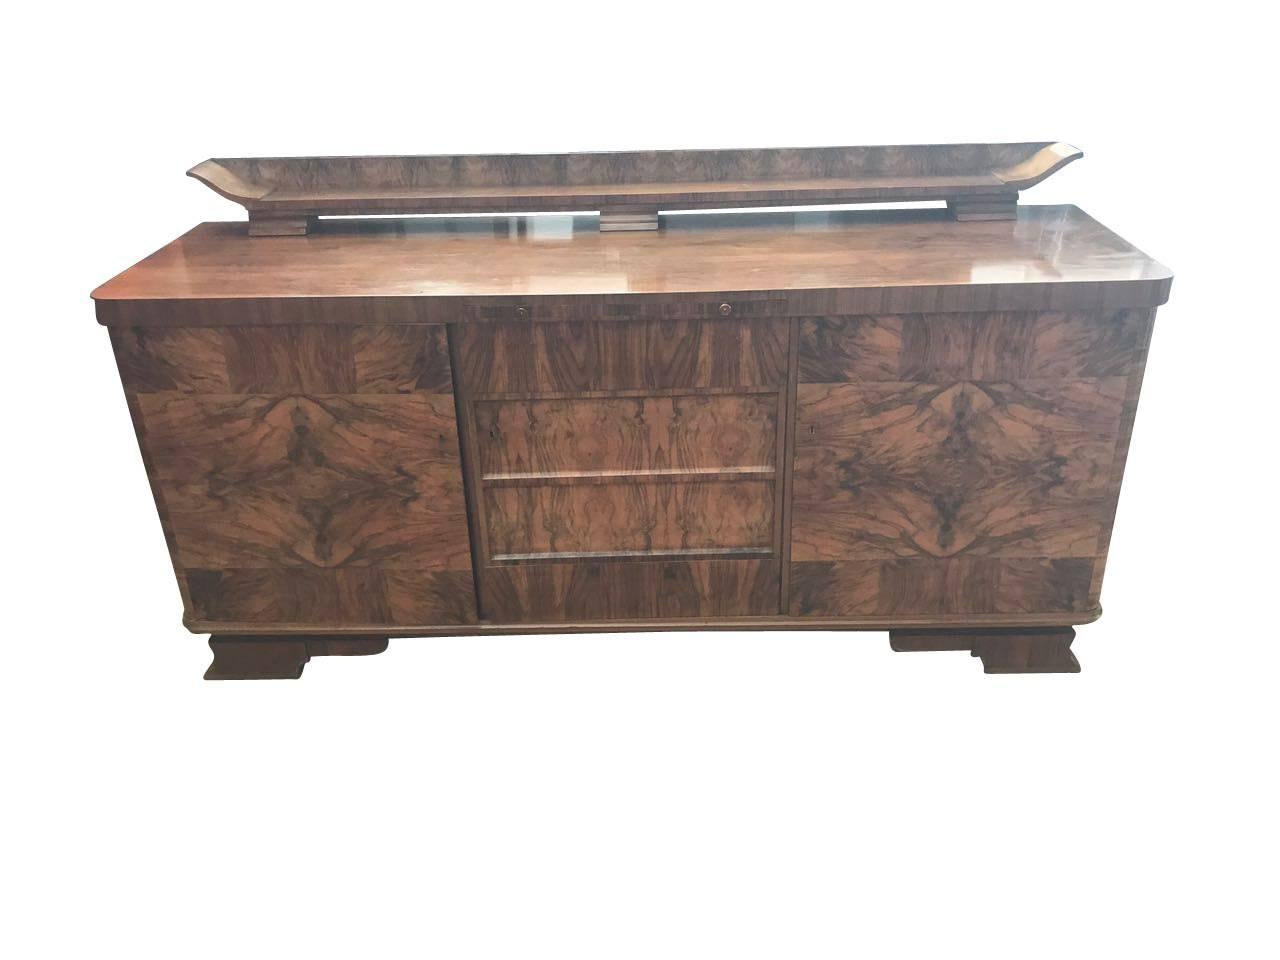 An Art Deco sideboard from France. The 1920s furniture has a walnut veneer with unique grain. The interior offers great storage space, as well as different storage possibilities. The straight-lined design combined with the elegant attachment / hutch